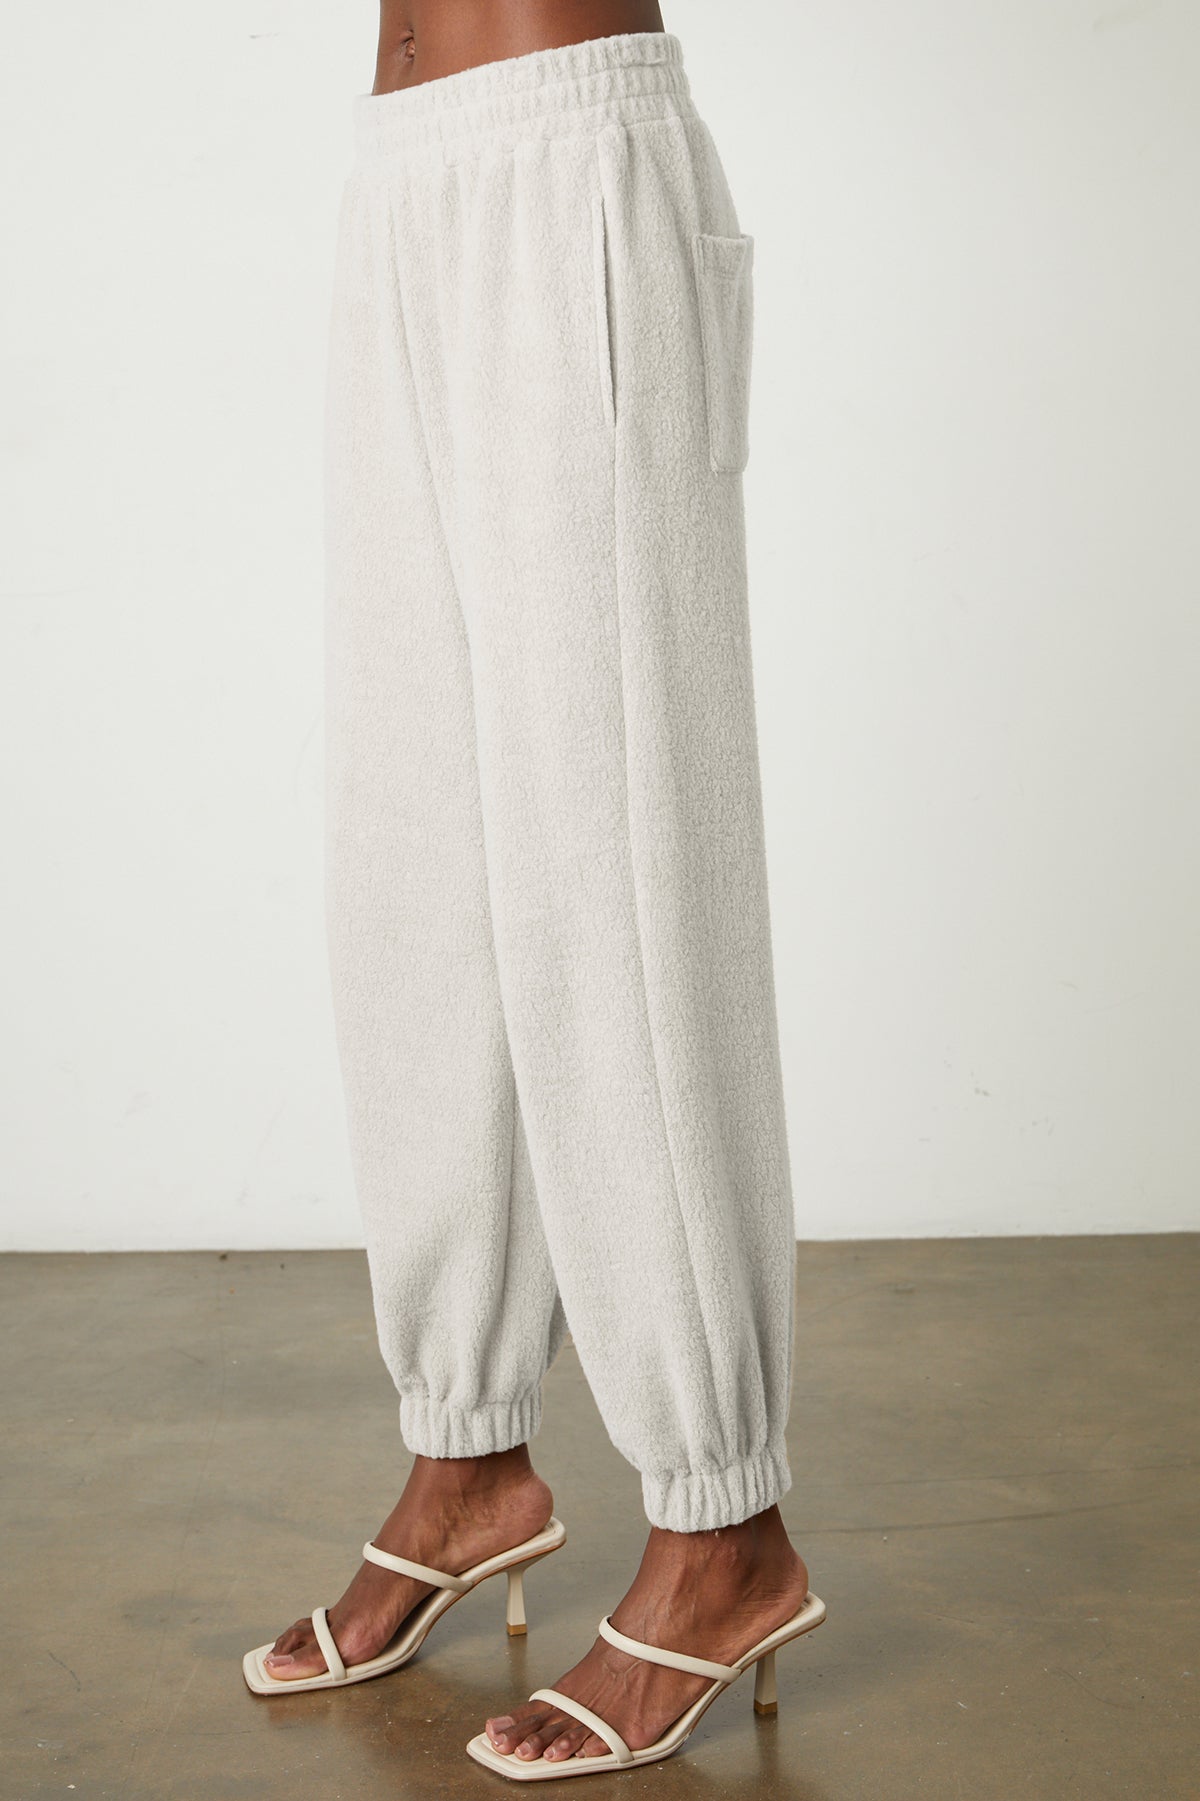 The model is wearing a pair of Velvet by Graham & Spencer BROOKIE FLEECE JOGGER pants.-26067963674817